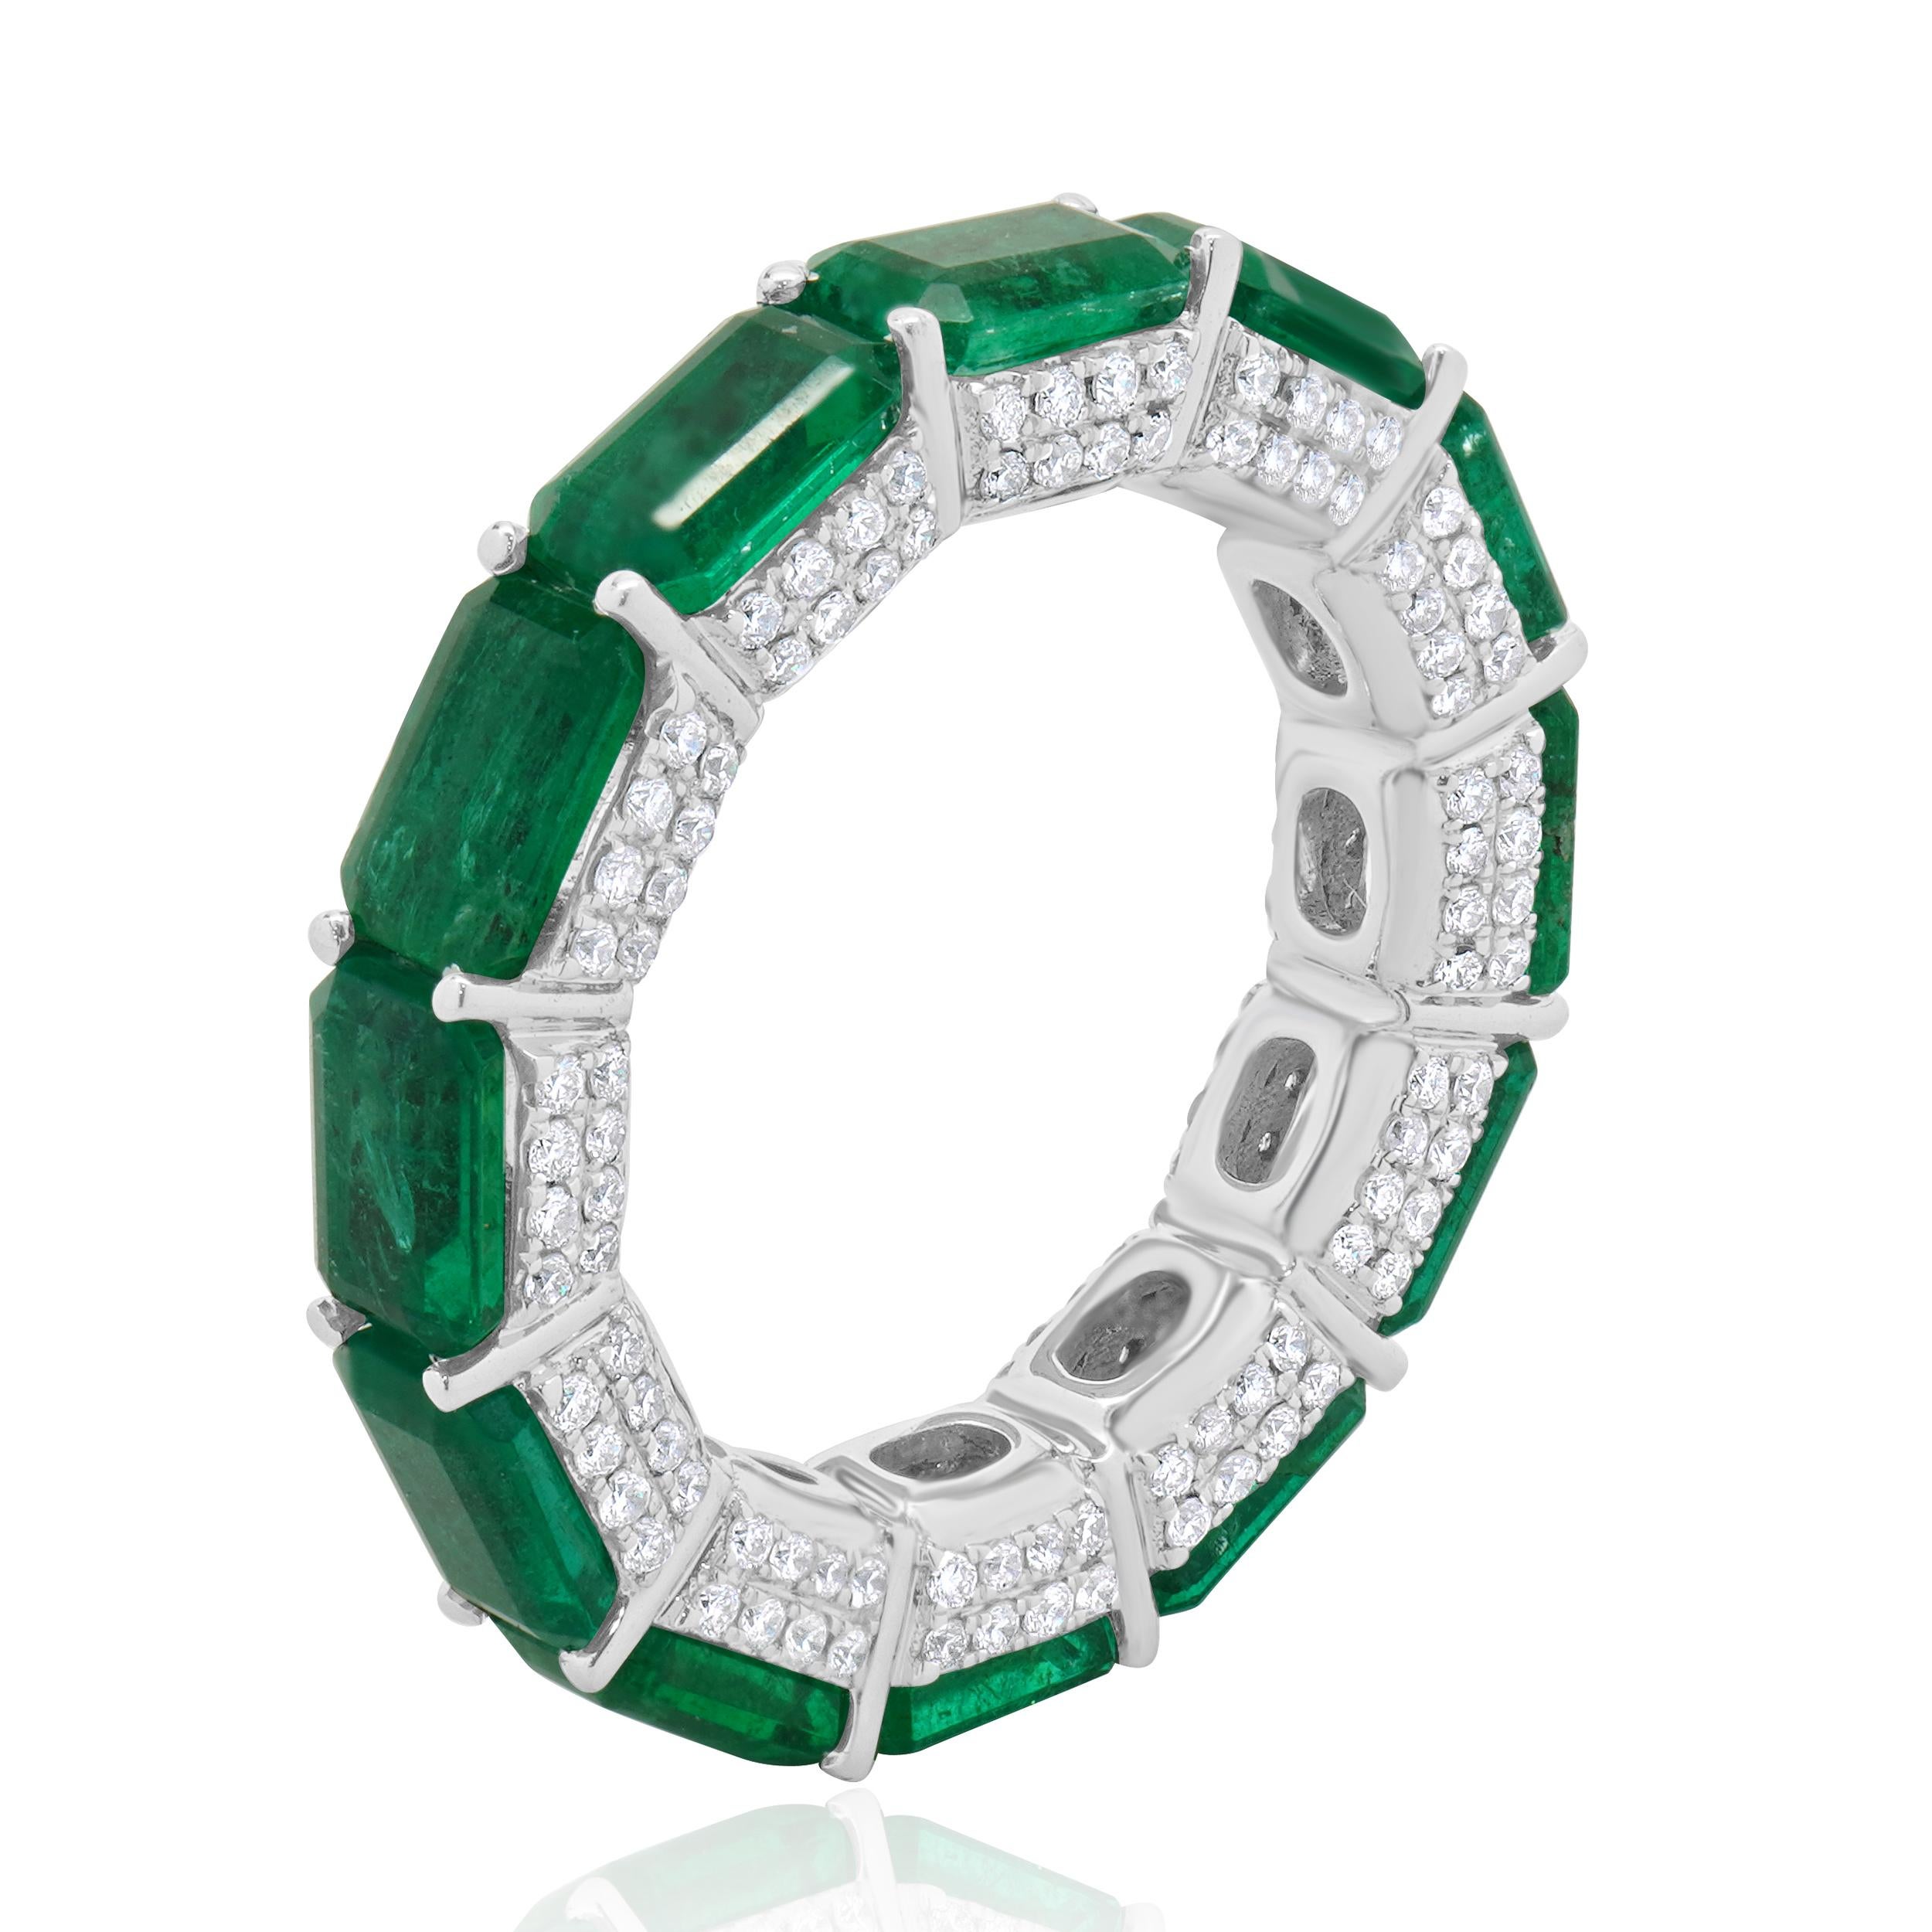 Designer: custom
Material: 14K white gold
Diamond:  round brilliant cut = 0.81cttw
Color: G
Clarity: SI1
Emeralds: 6.49cttw
Ring Size: 6.5 (please allow two extra shipping days for sizing requests) 
Weight: 5.56 grams
